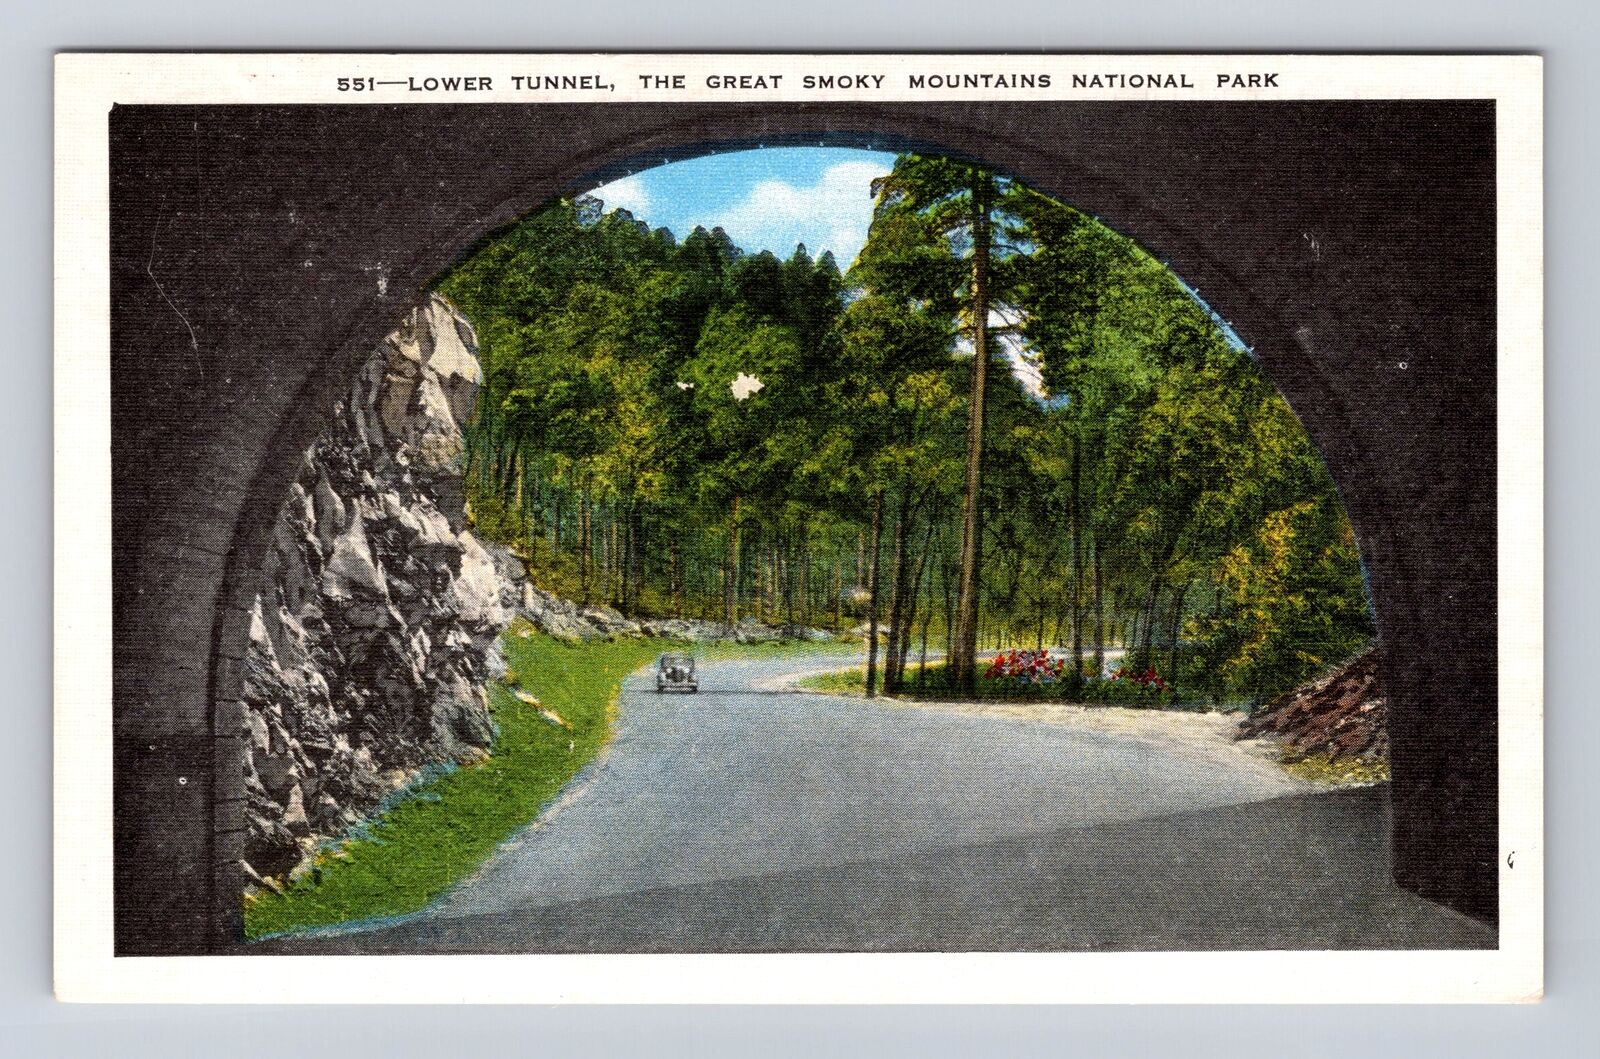 Great Smoky Mountains National Park, Lower Tunnel, Series #551, Vintage Postcard